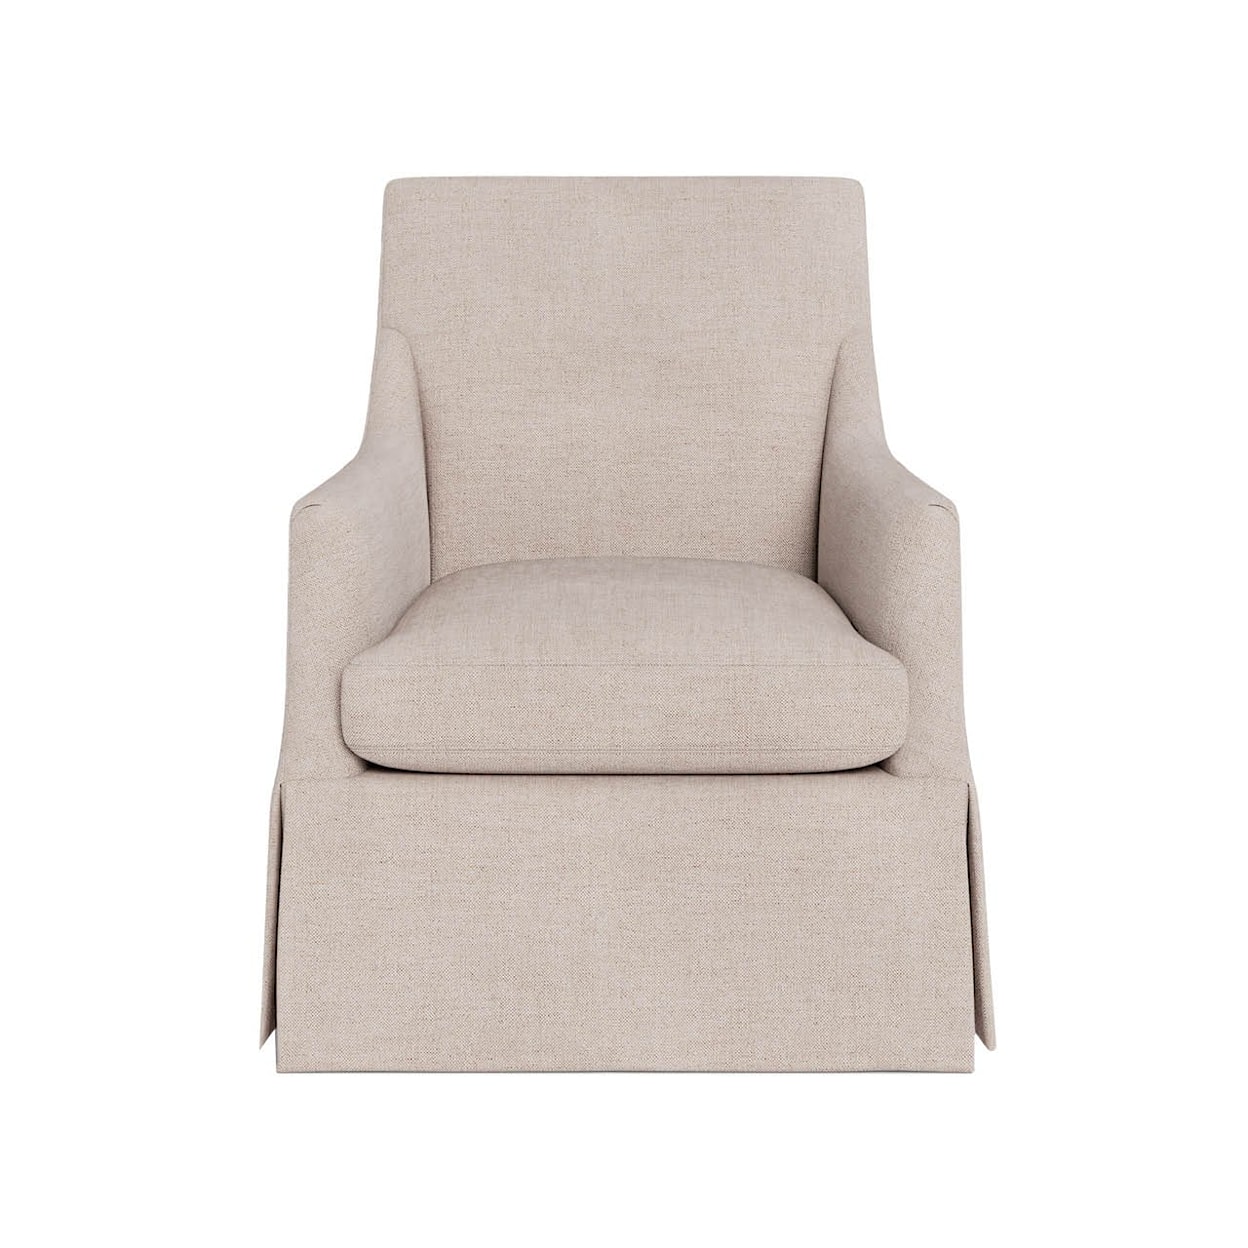 Universal Special Order Anniston Swivel Chair